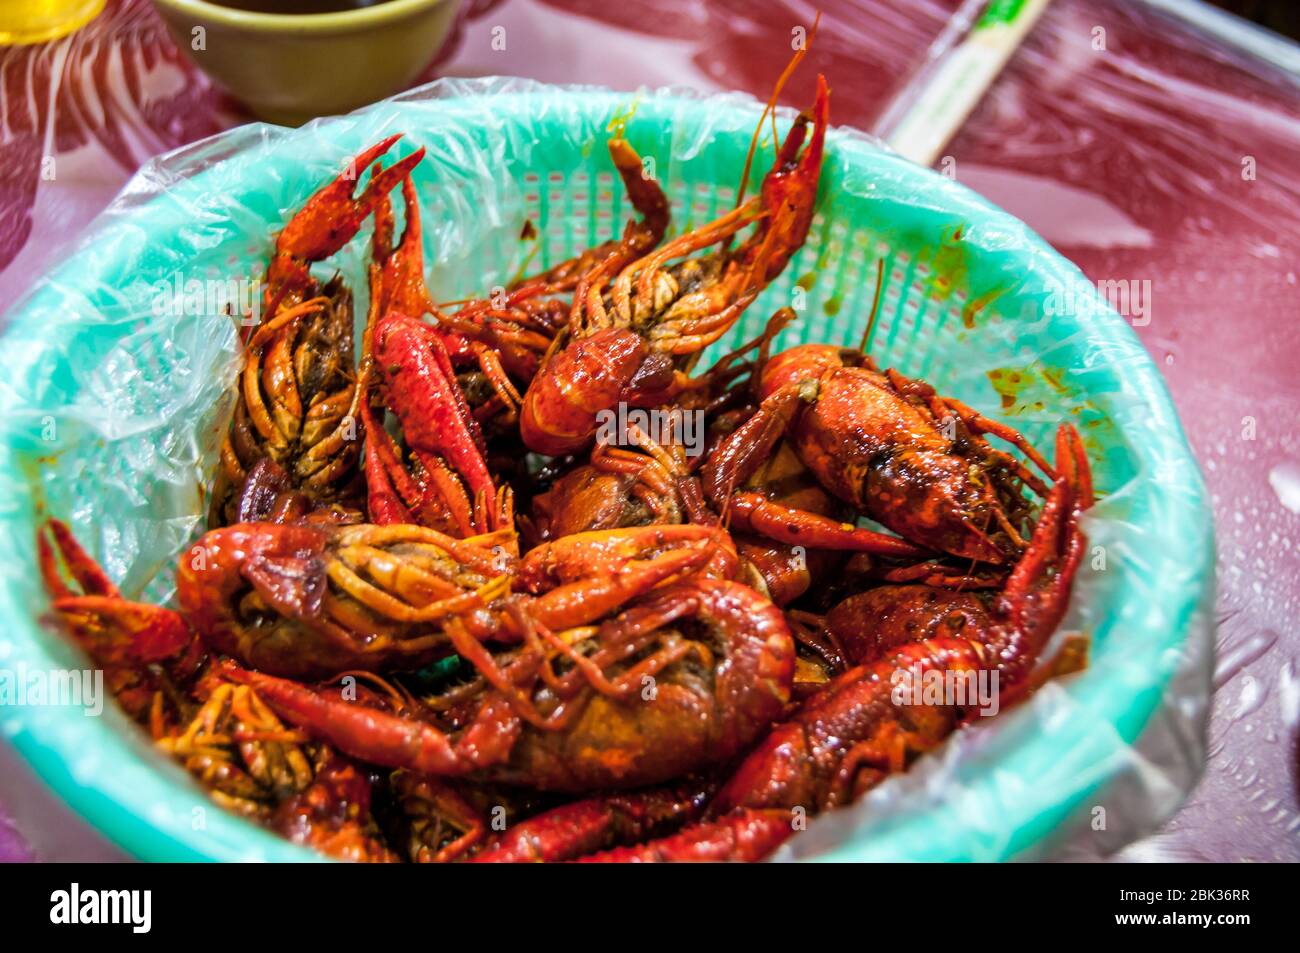 A bowl of freshly cooked crayfish (yabbies) with a mala sauce on Shanghai's Shouning Road. Stock Photo